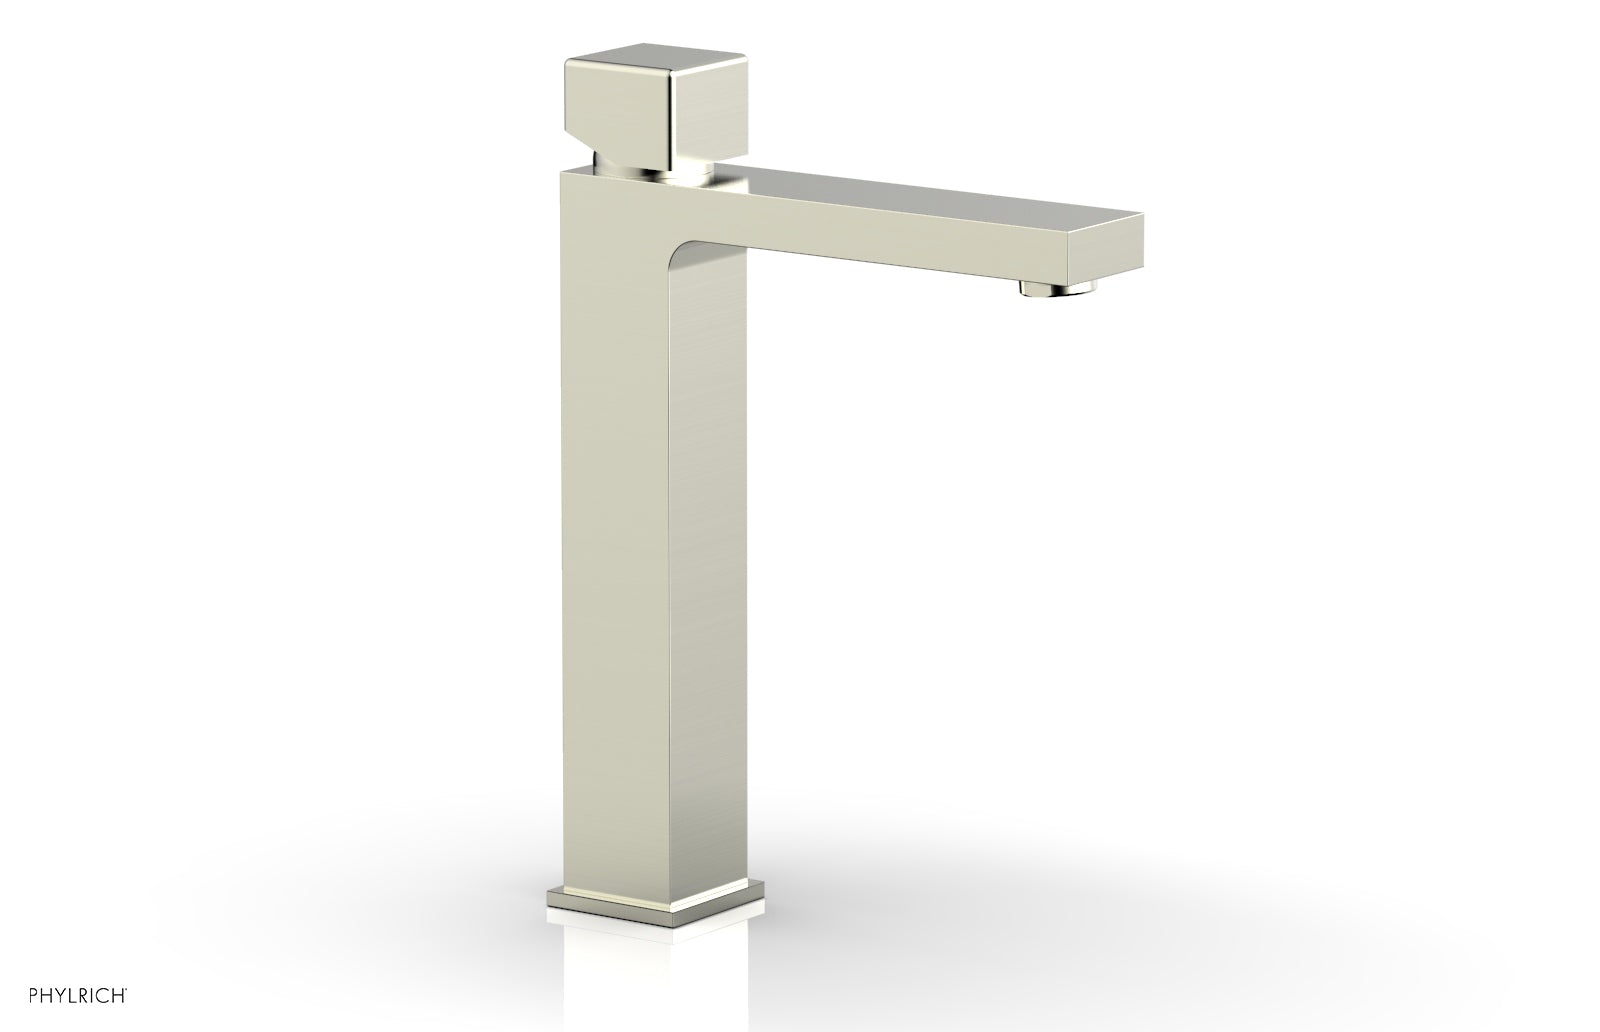 Phylrich MIX Single Hole Lavatory Faucet, Tall - Cube Handle